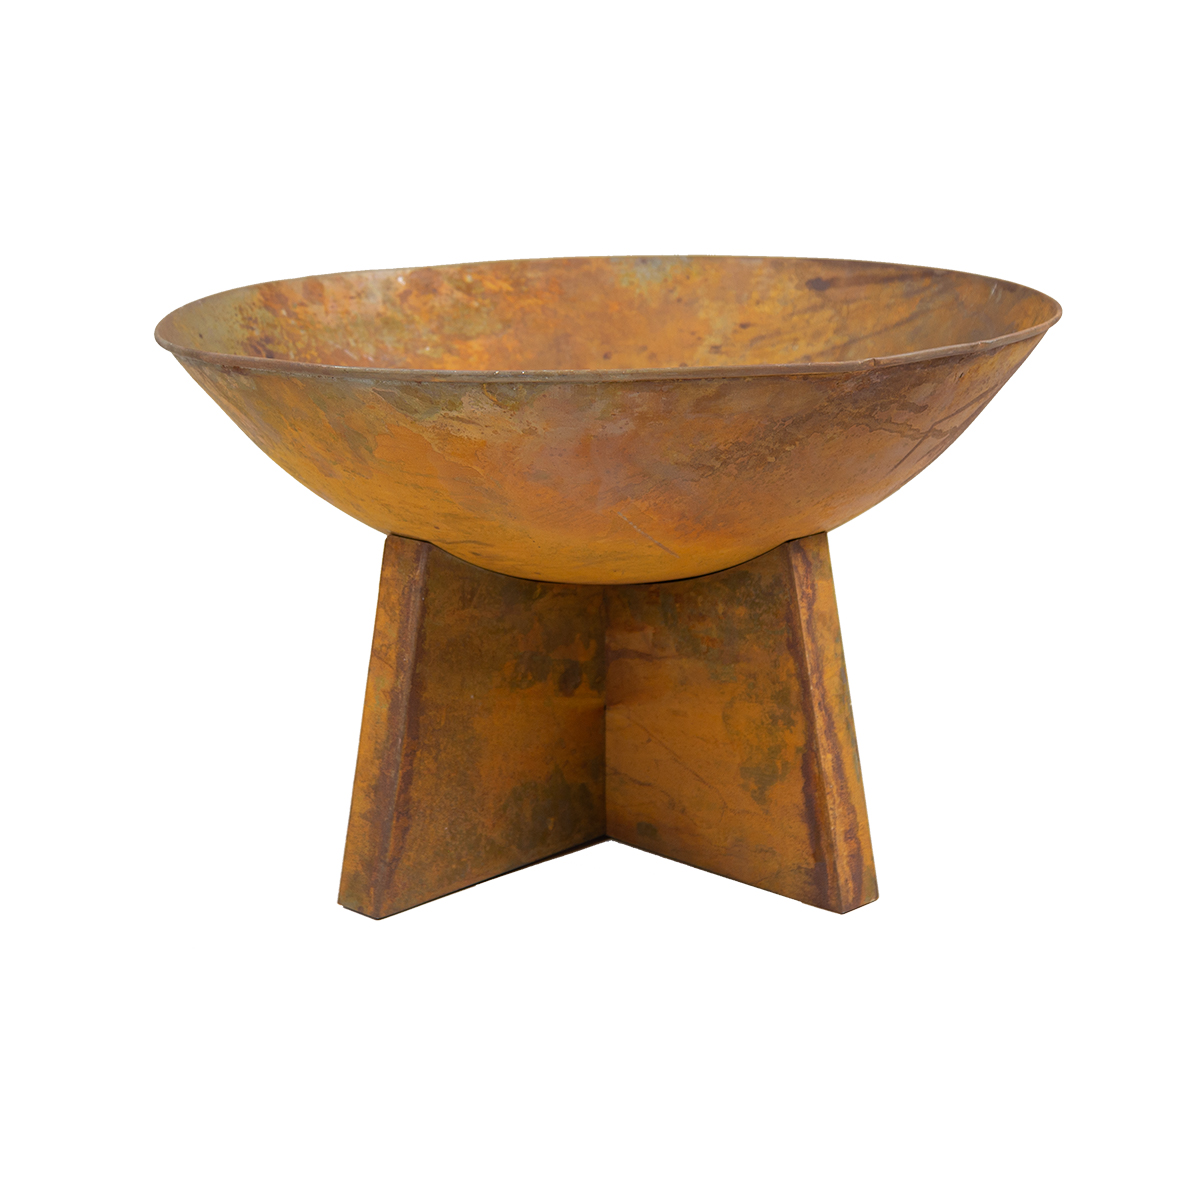 Charles Bentley 60cm Oxydised Rust Finish Fire Pit